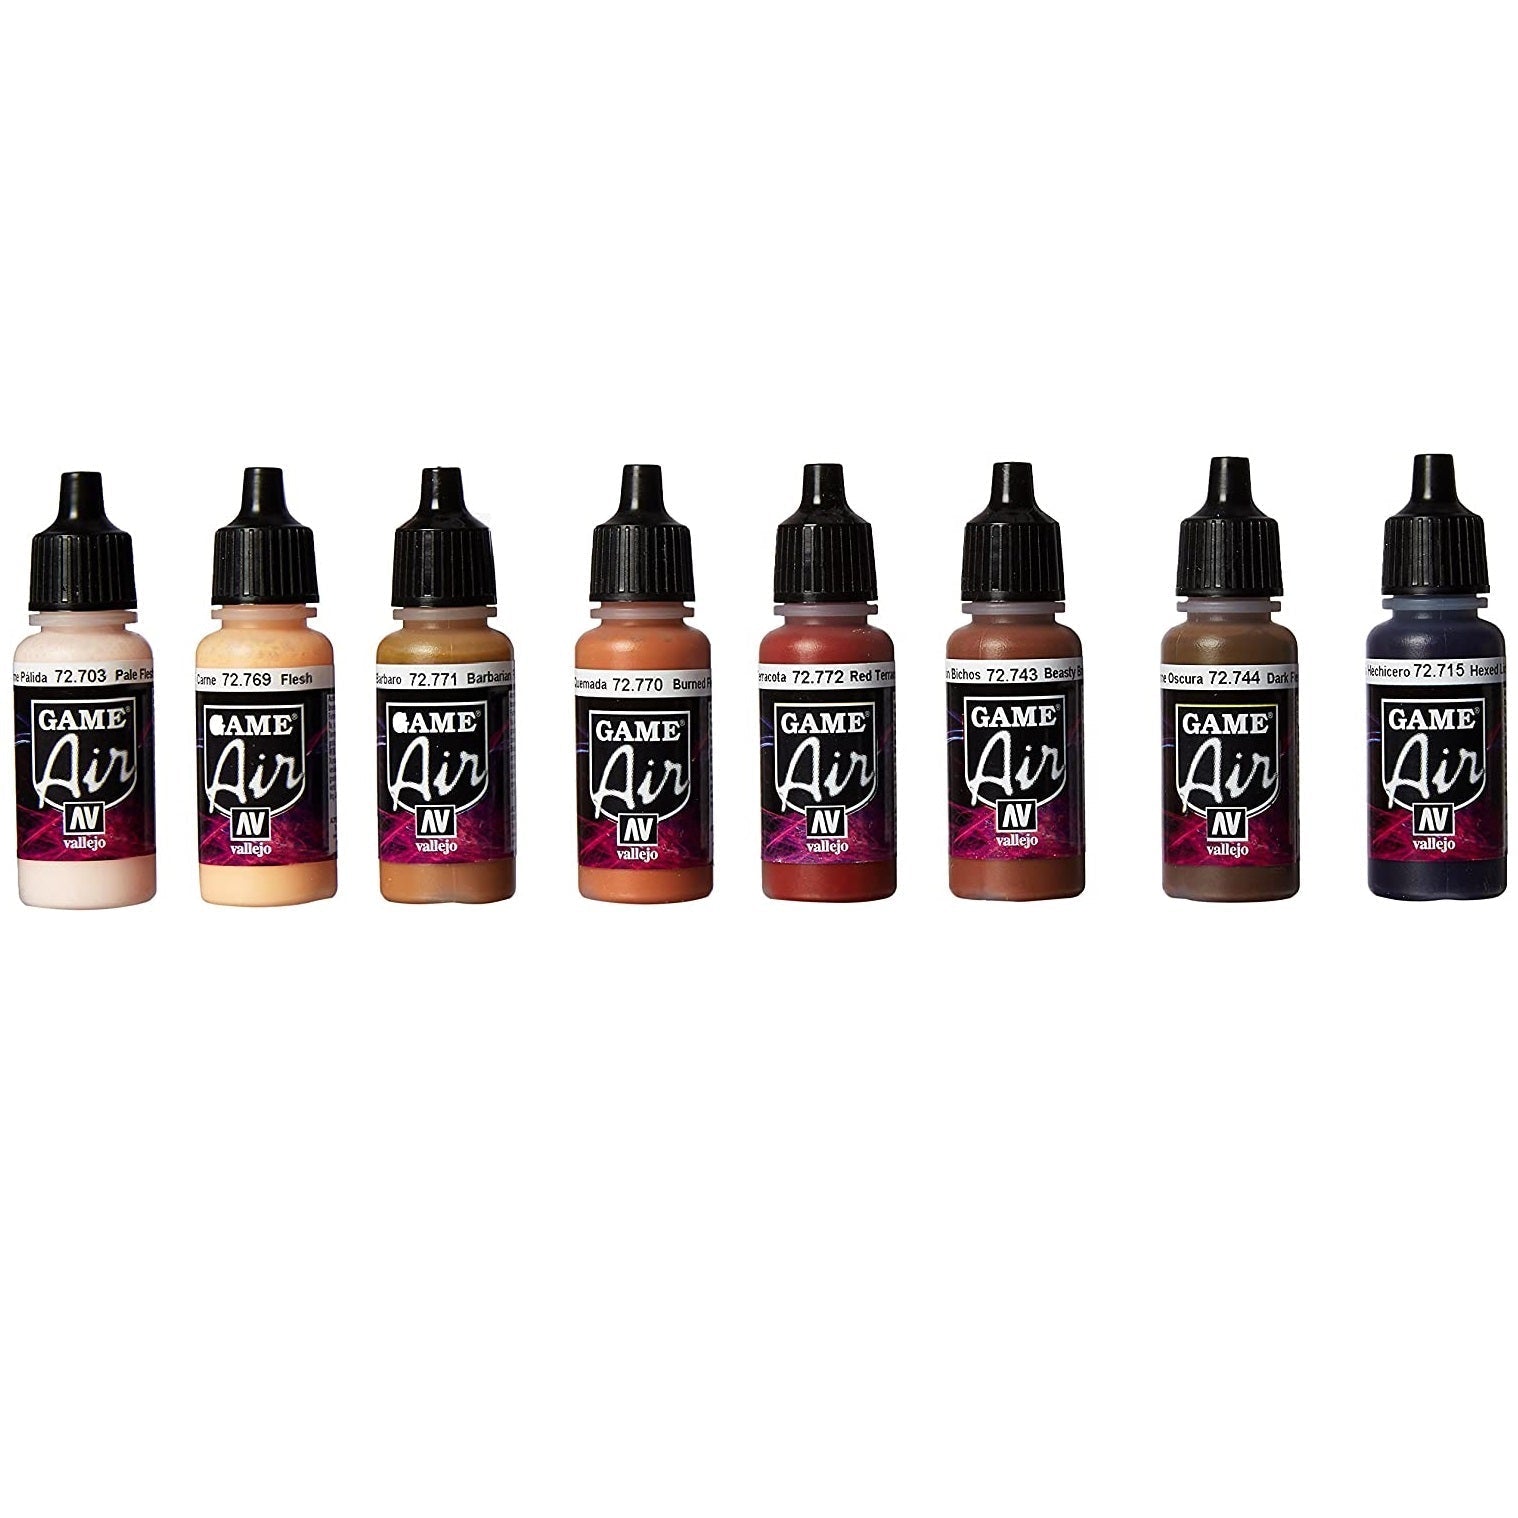 Acrylicos Vallejo Face Painting Model Air Paint Set, 1/2 Fl. oz. Bottles, 8 Colors - Micro - Mark Acrylic Airbrush Paint